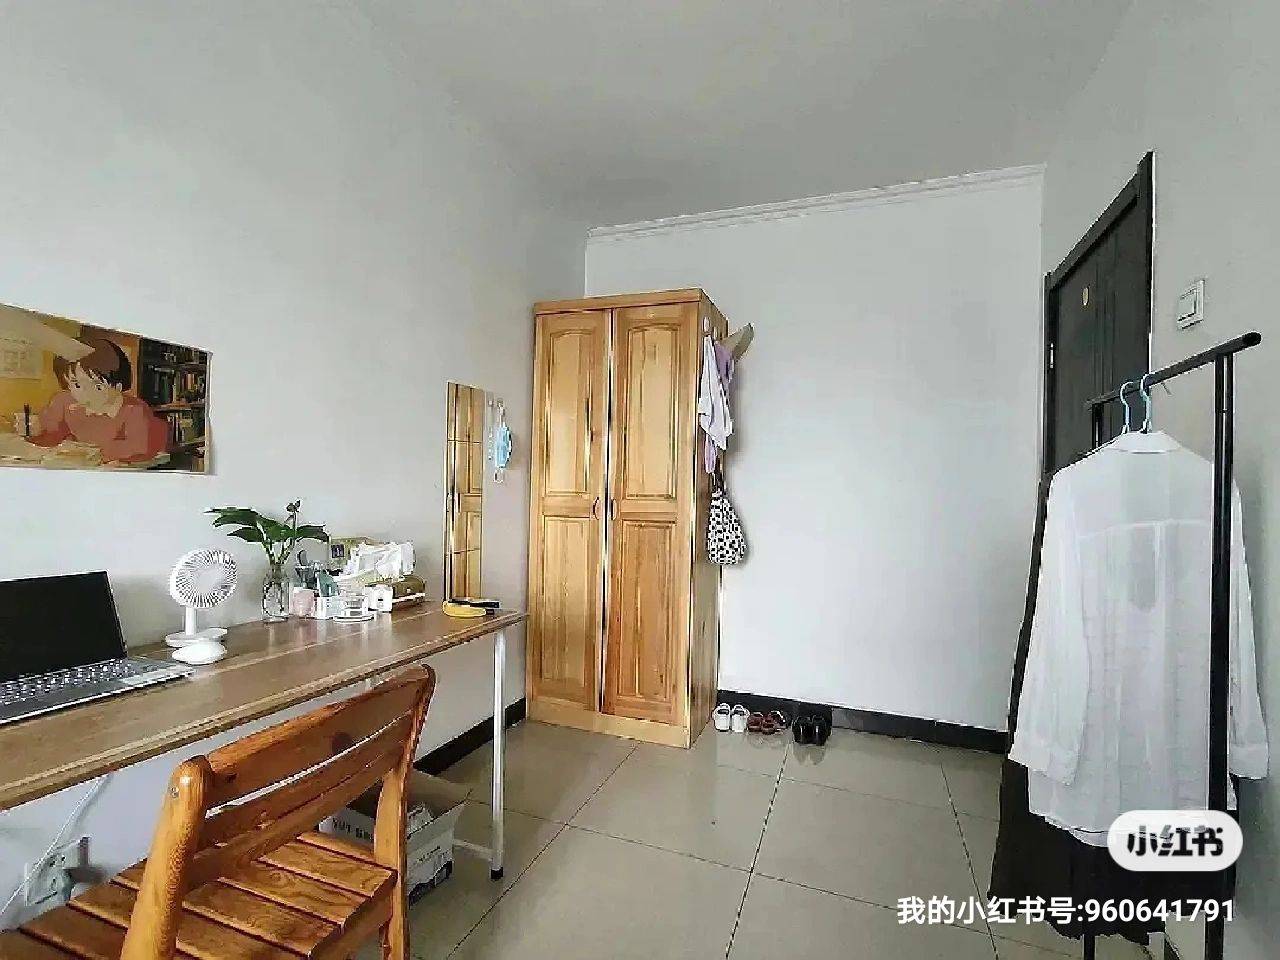 Beijing-Haidian-Cozy Home,Clean&Comfy,No Gender Limit,“Friends”,Chilled